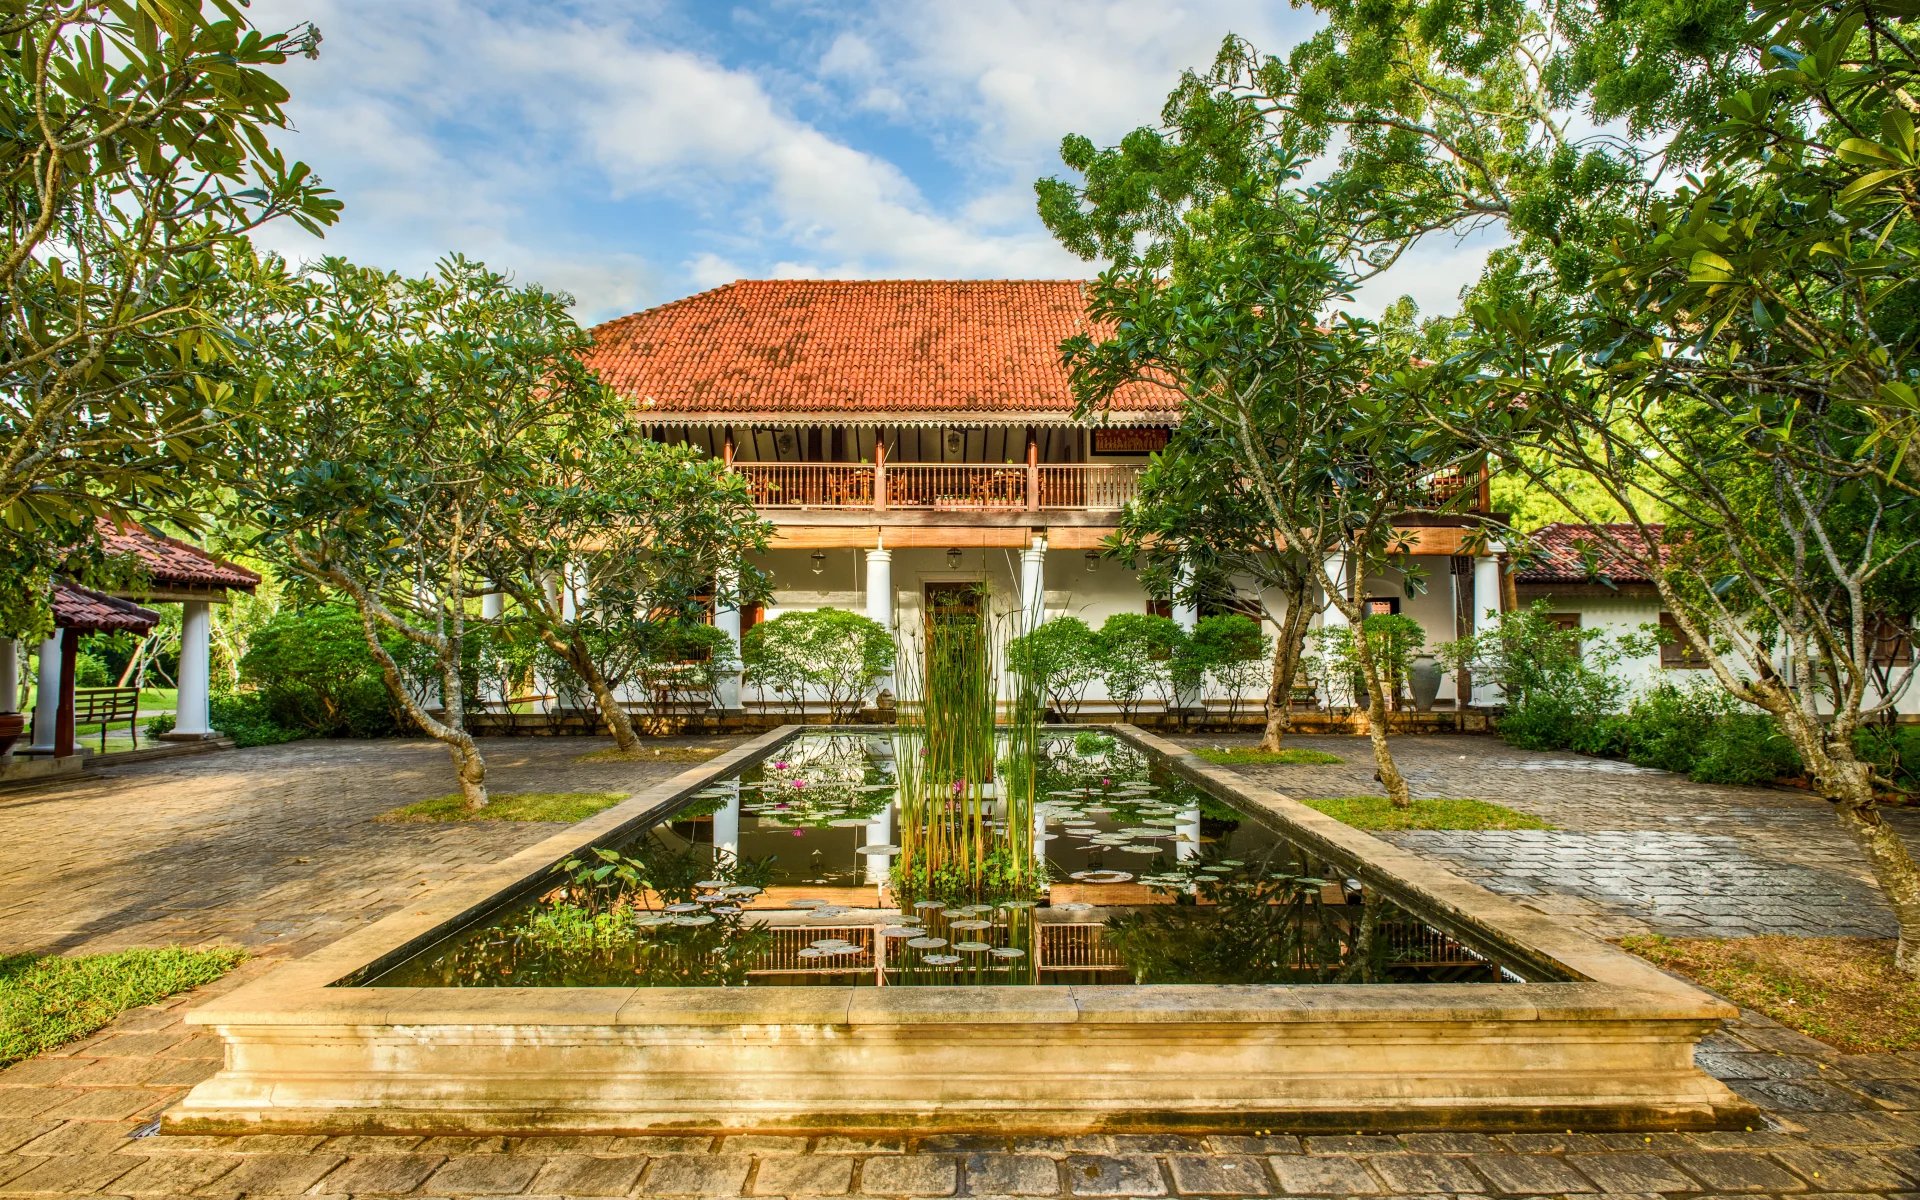 The exterior of the main building of Ulagalla Resort is fronted by a rectangular lily pond and surrounded by trees. Its roof is red